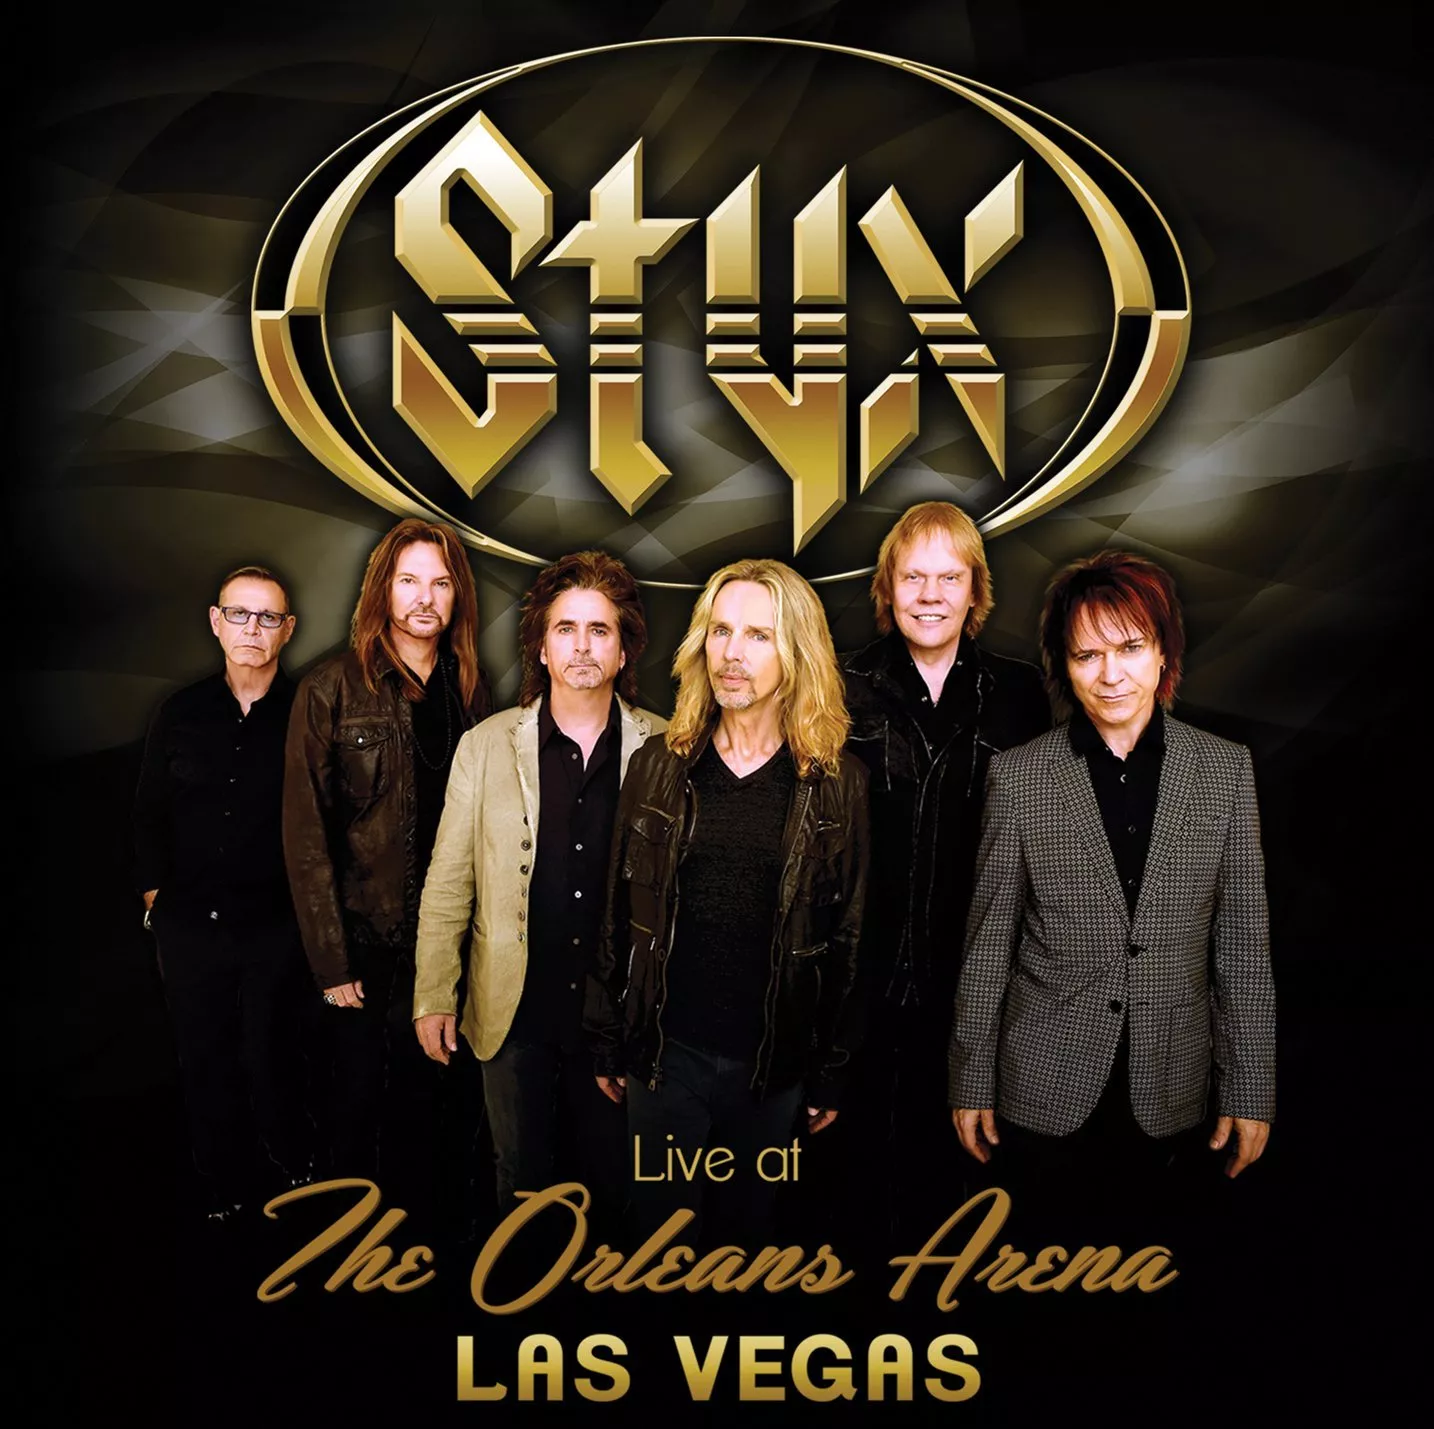 Live at The Orleans Arena Las Vegas - Styx